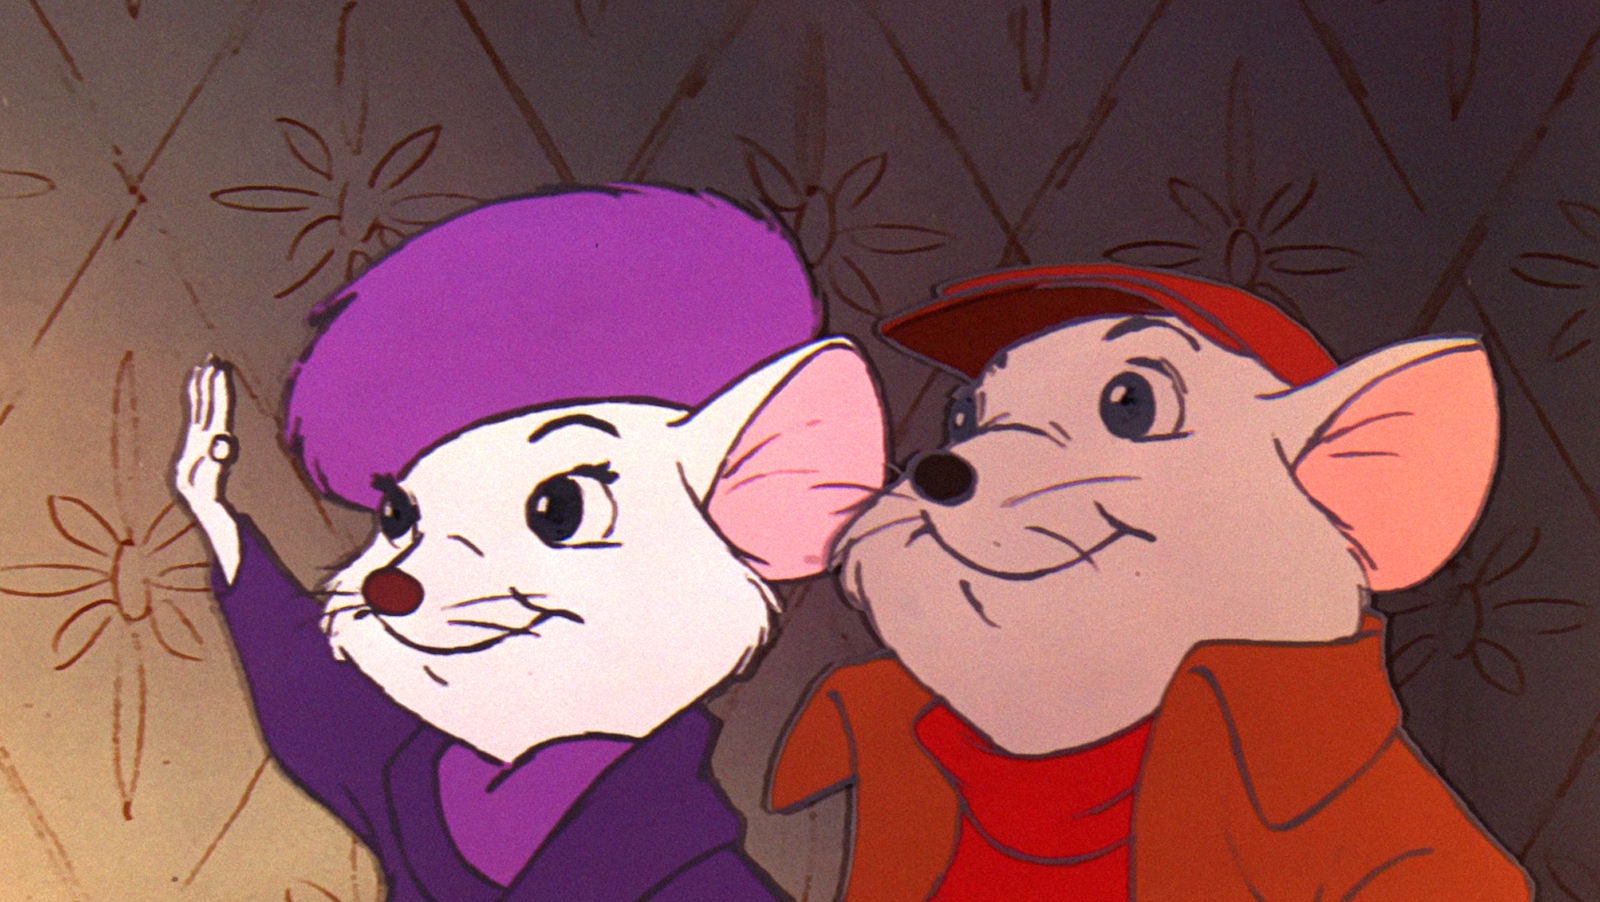 Two adorable mice, one in a purple hat and another in a red chapeau look offscreen smiling.